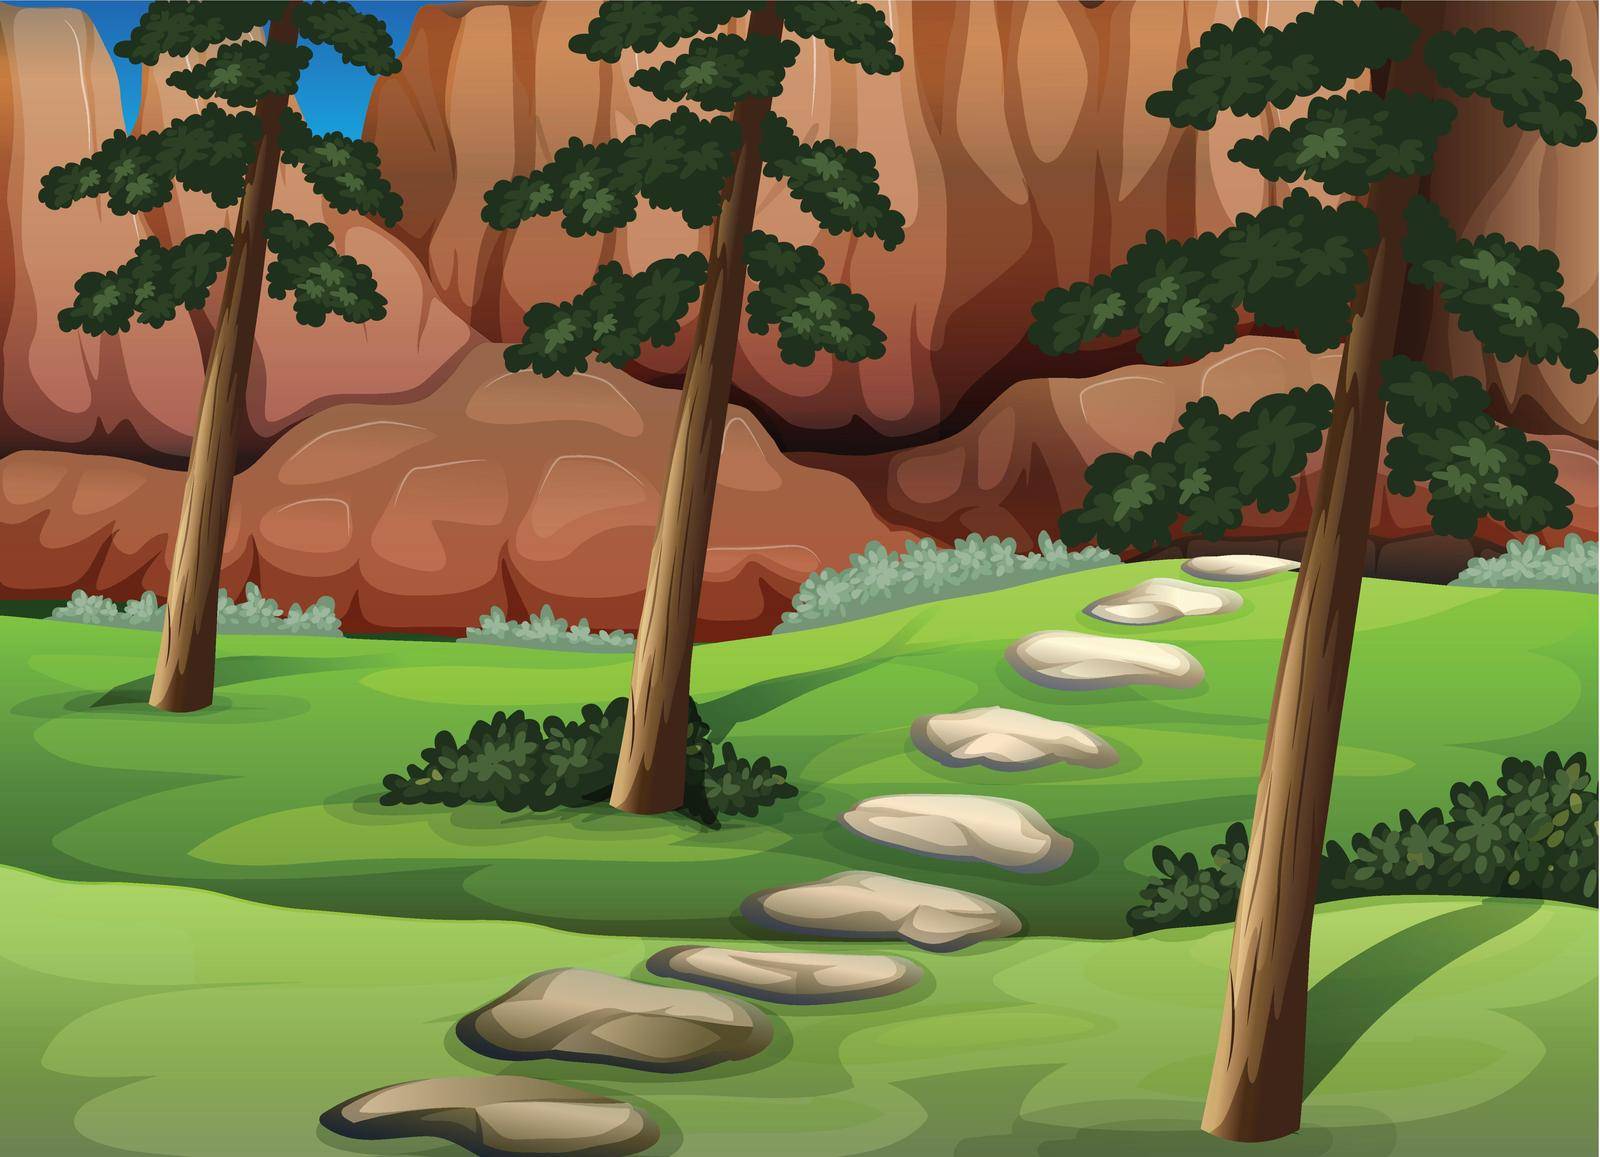 Illustration of a forest with big rocks